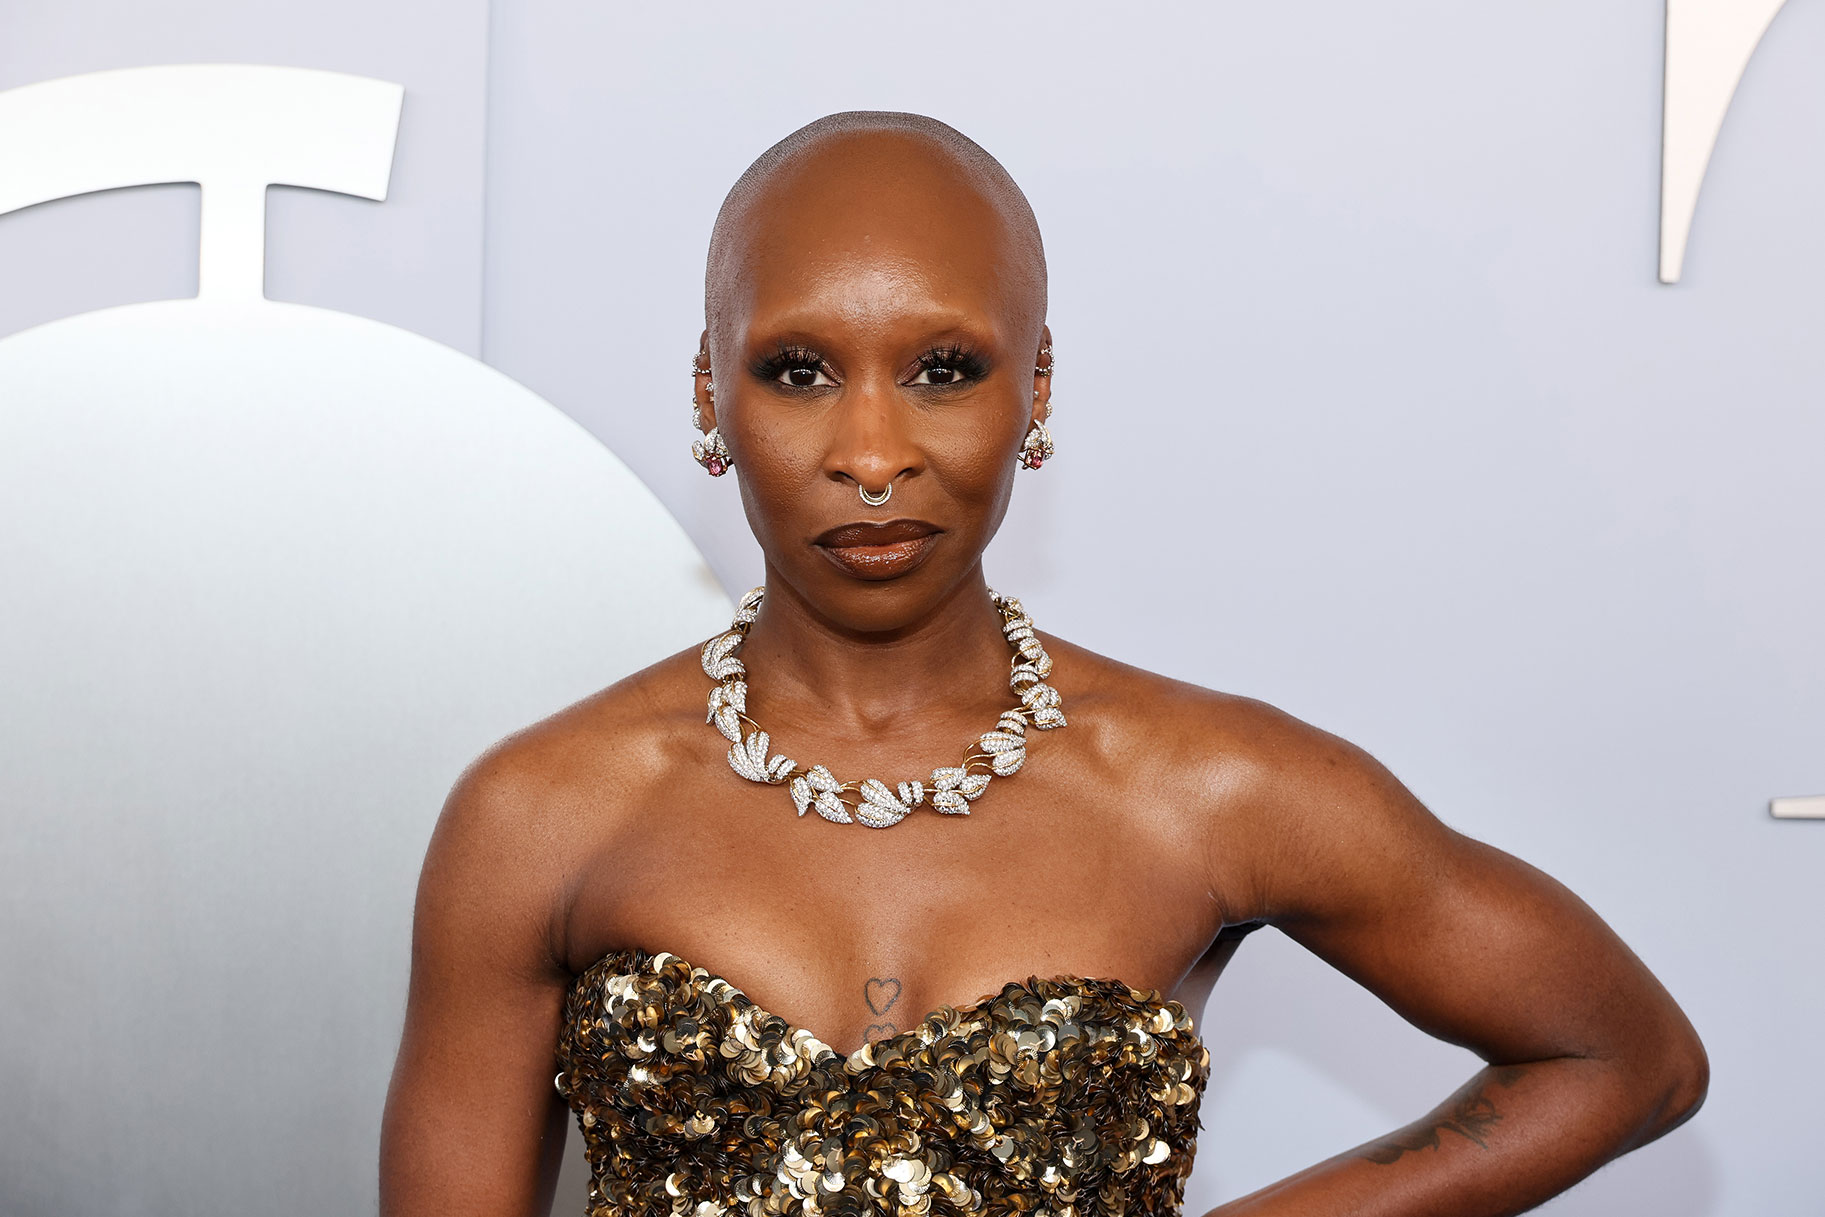 Cynthia Erivo’s “Killing Me Softly with His Song” is stunning